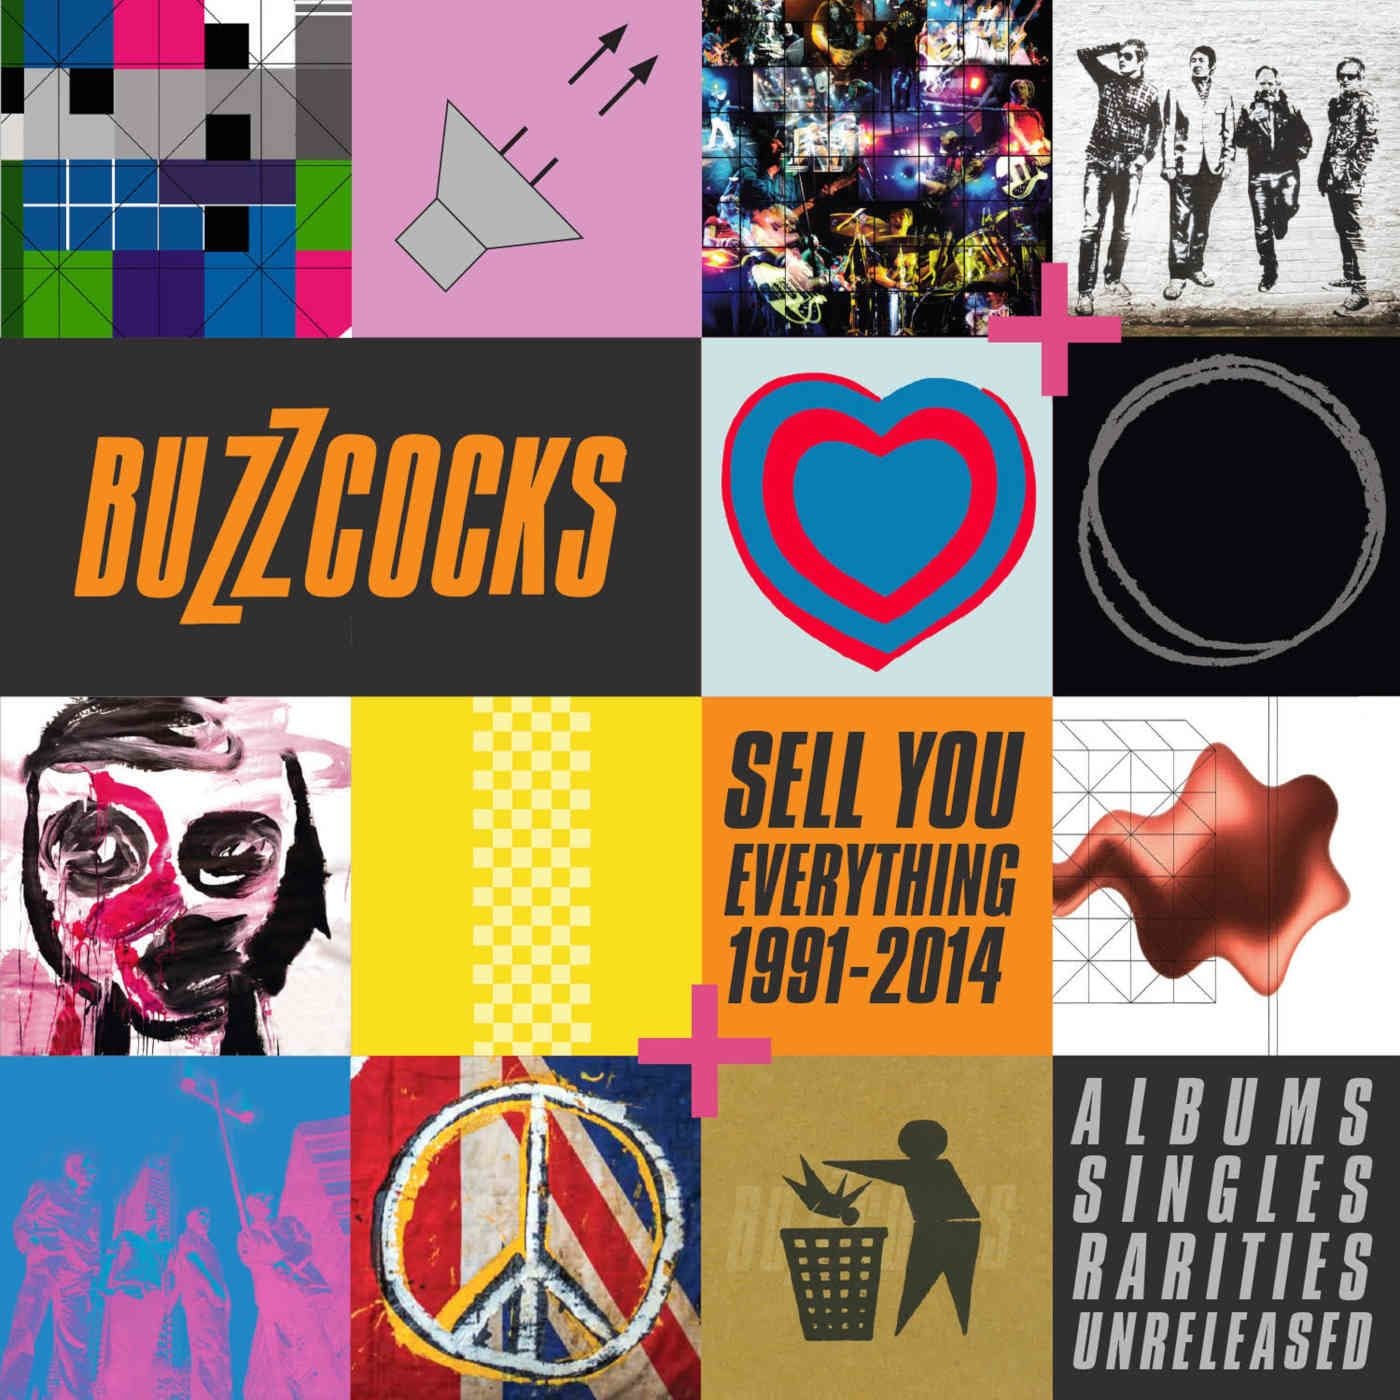 2011’s ‘A Different Compilation’ and 2014 Album ‘The Way’ Are a Fitting Full Stop to Buzzcocks Past